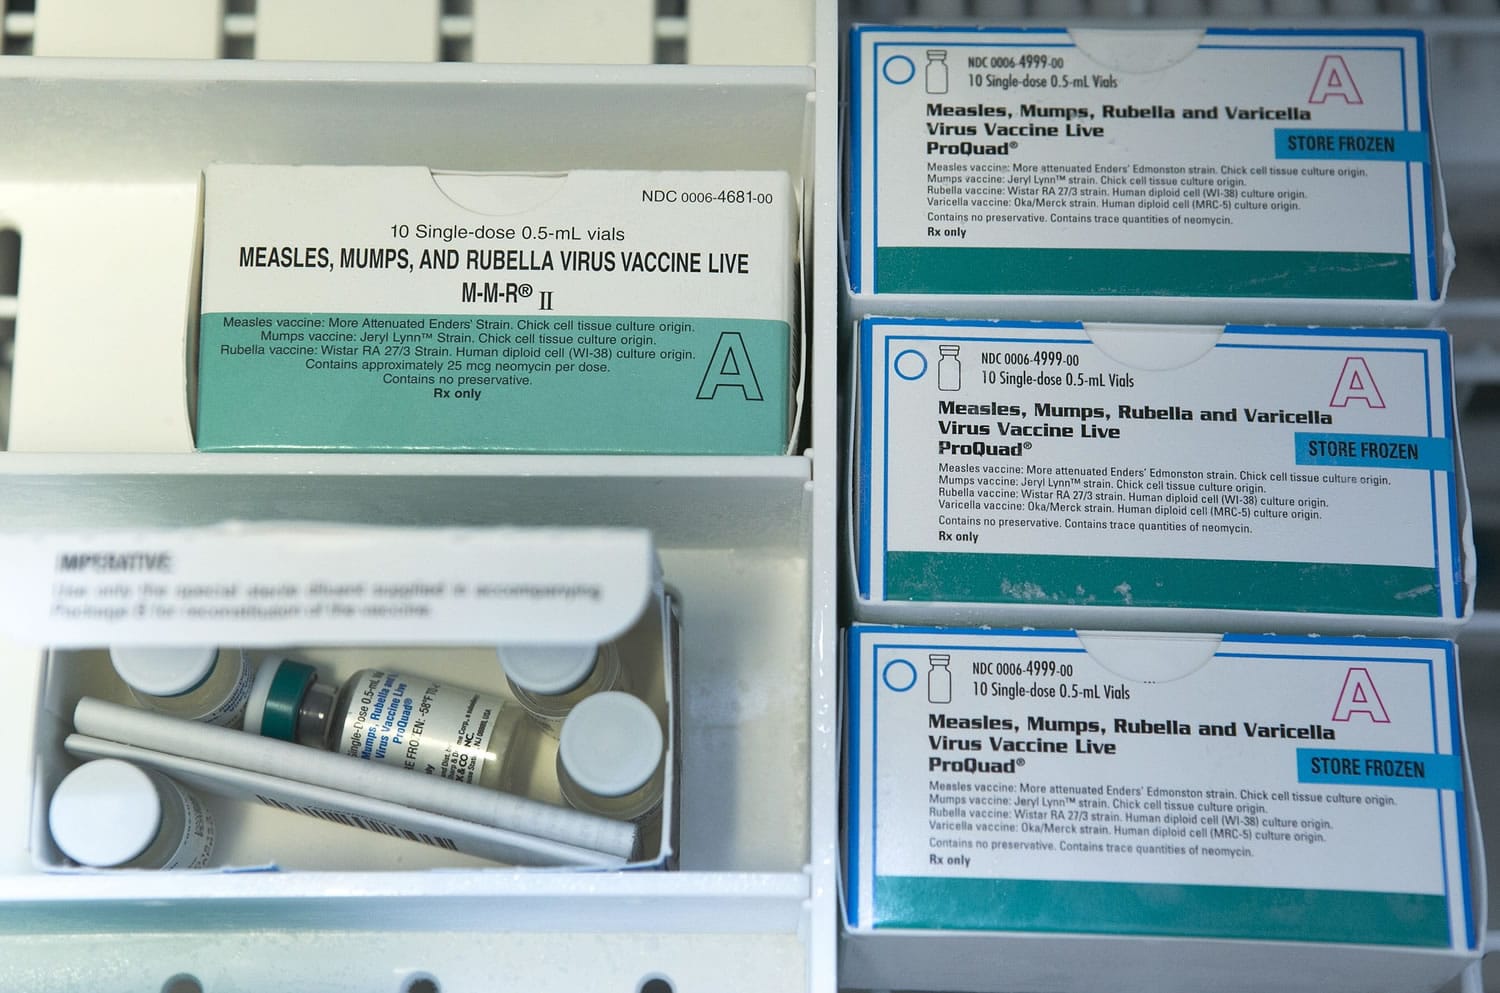 Boxes of the measles, mumps and rubella virus vaccine and measles, mumps, rubella and varicella vaccine are shown inside a freezer at a doctor's office in Northridge, Calif.